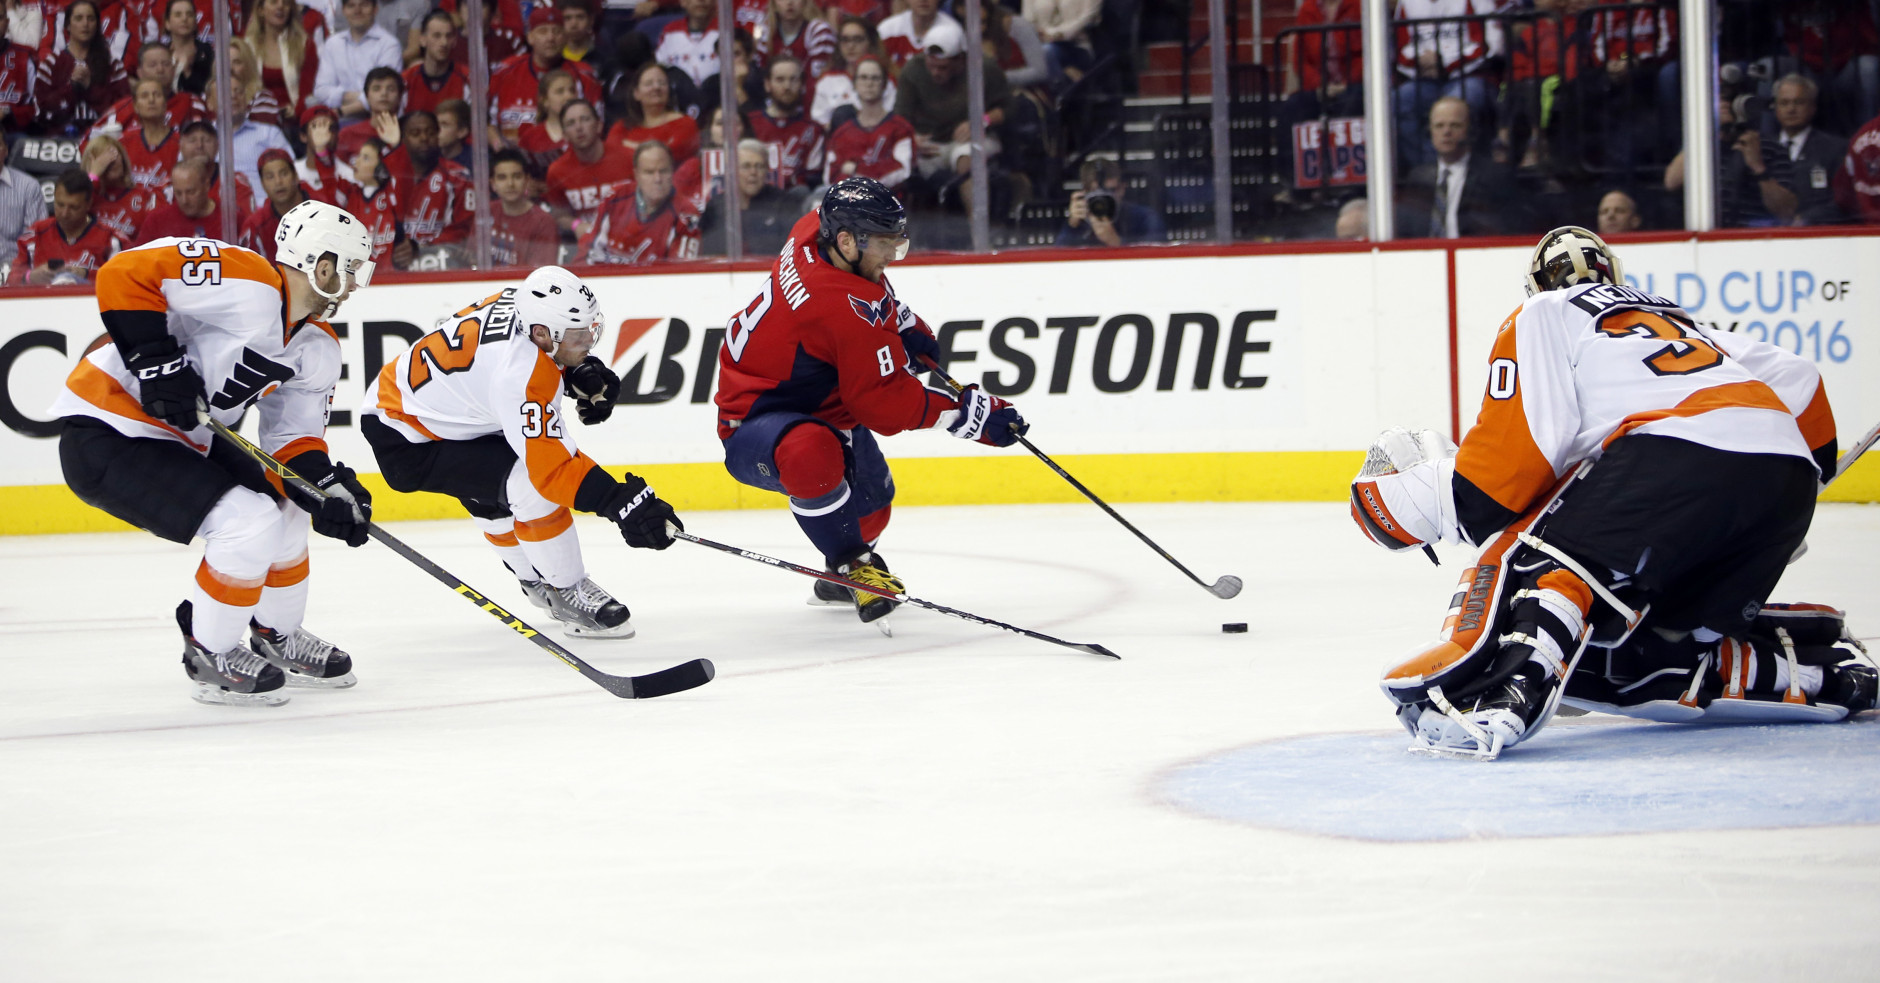 Washington Capitals left wing Alex Ovechkin (8), from Russia, prepares a shot that was then stopped by Philadelphia Flyers goalie Michal Neuvirth (30), from the Czech Republic, during the second period of Game 5 in the first round of the NHL Stanley Cup hockey playoffs, Friday, April 22, 2016, in Washington. (AP Photo/Alex Brandon)